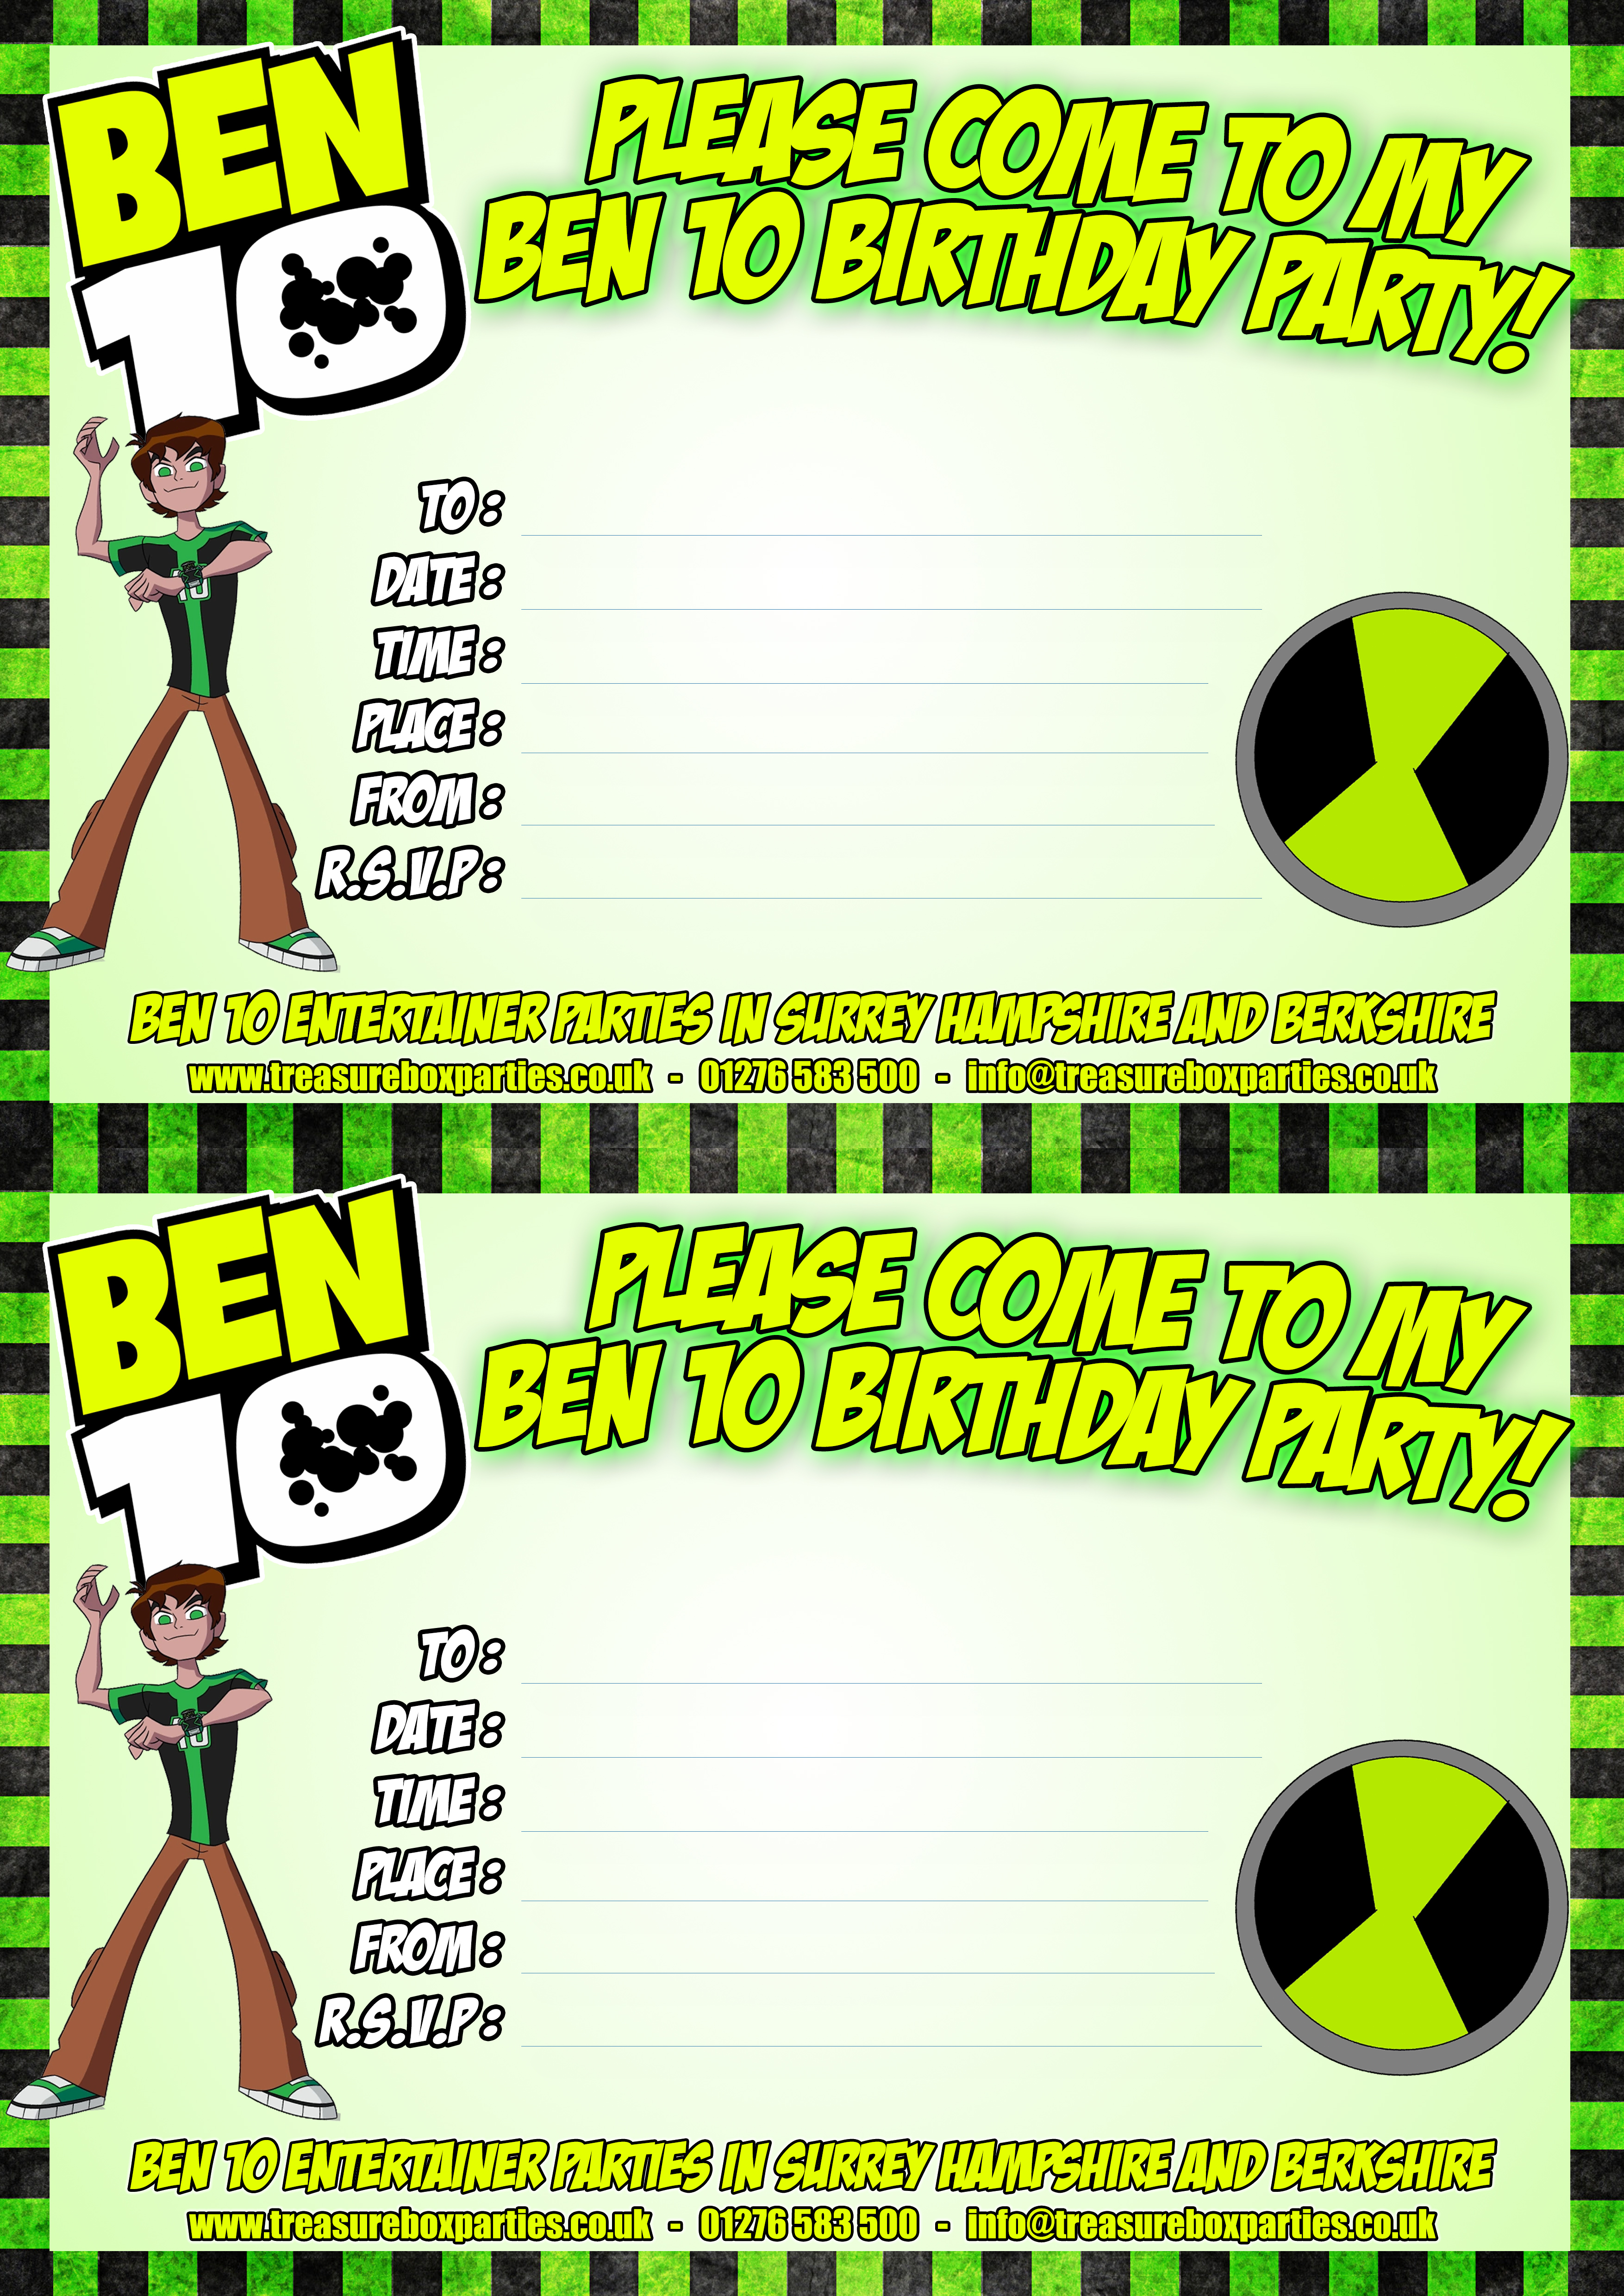 ben-10-printable-party-invitation-sheet-childrens-entertainer-parties